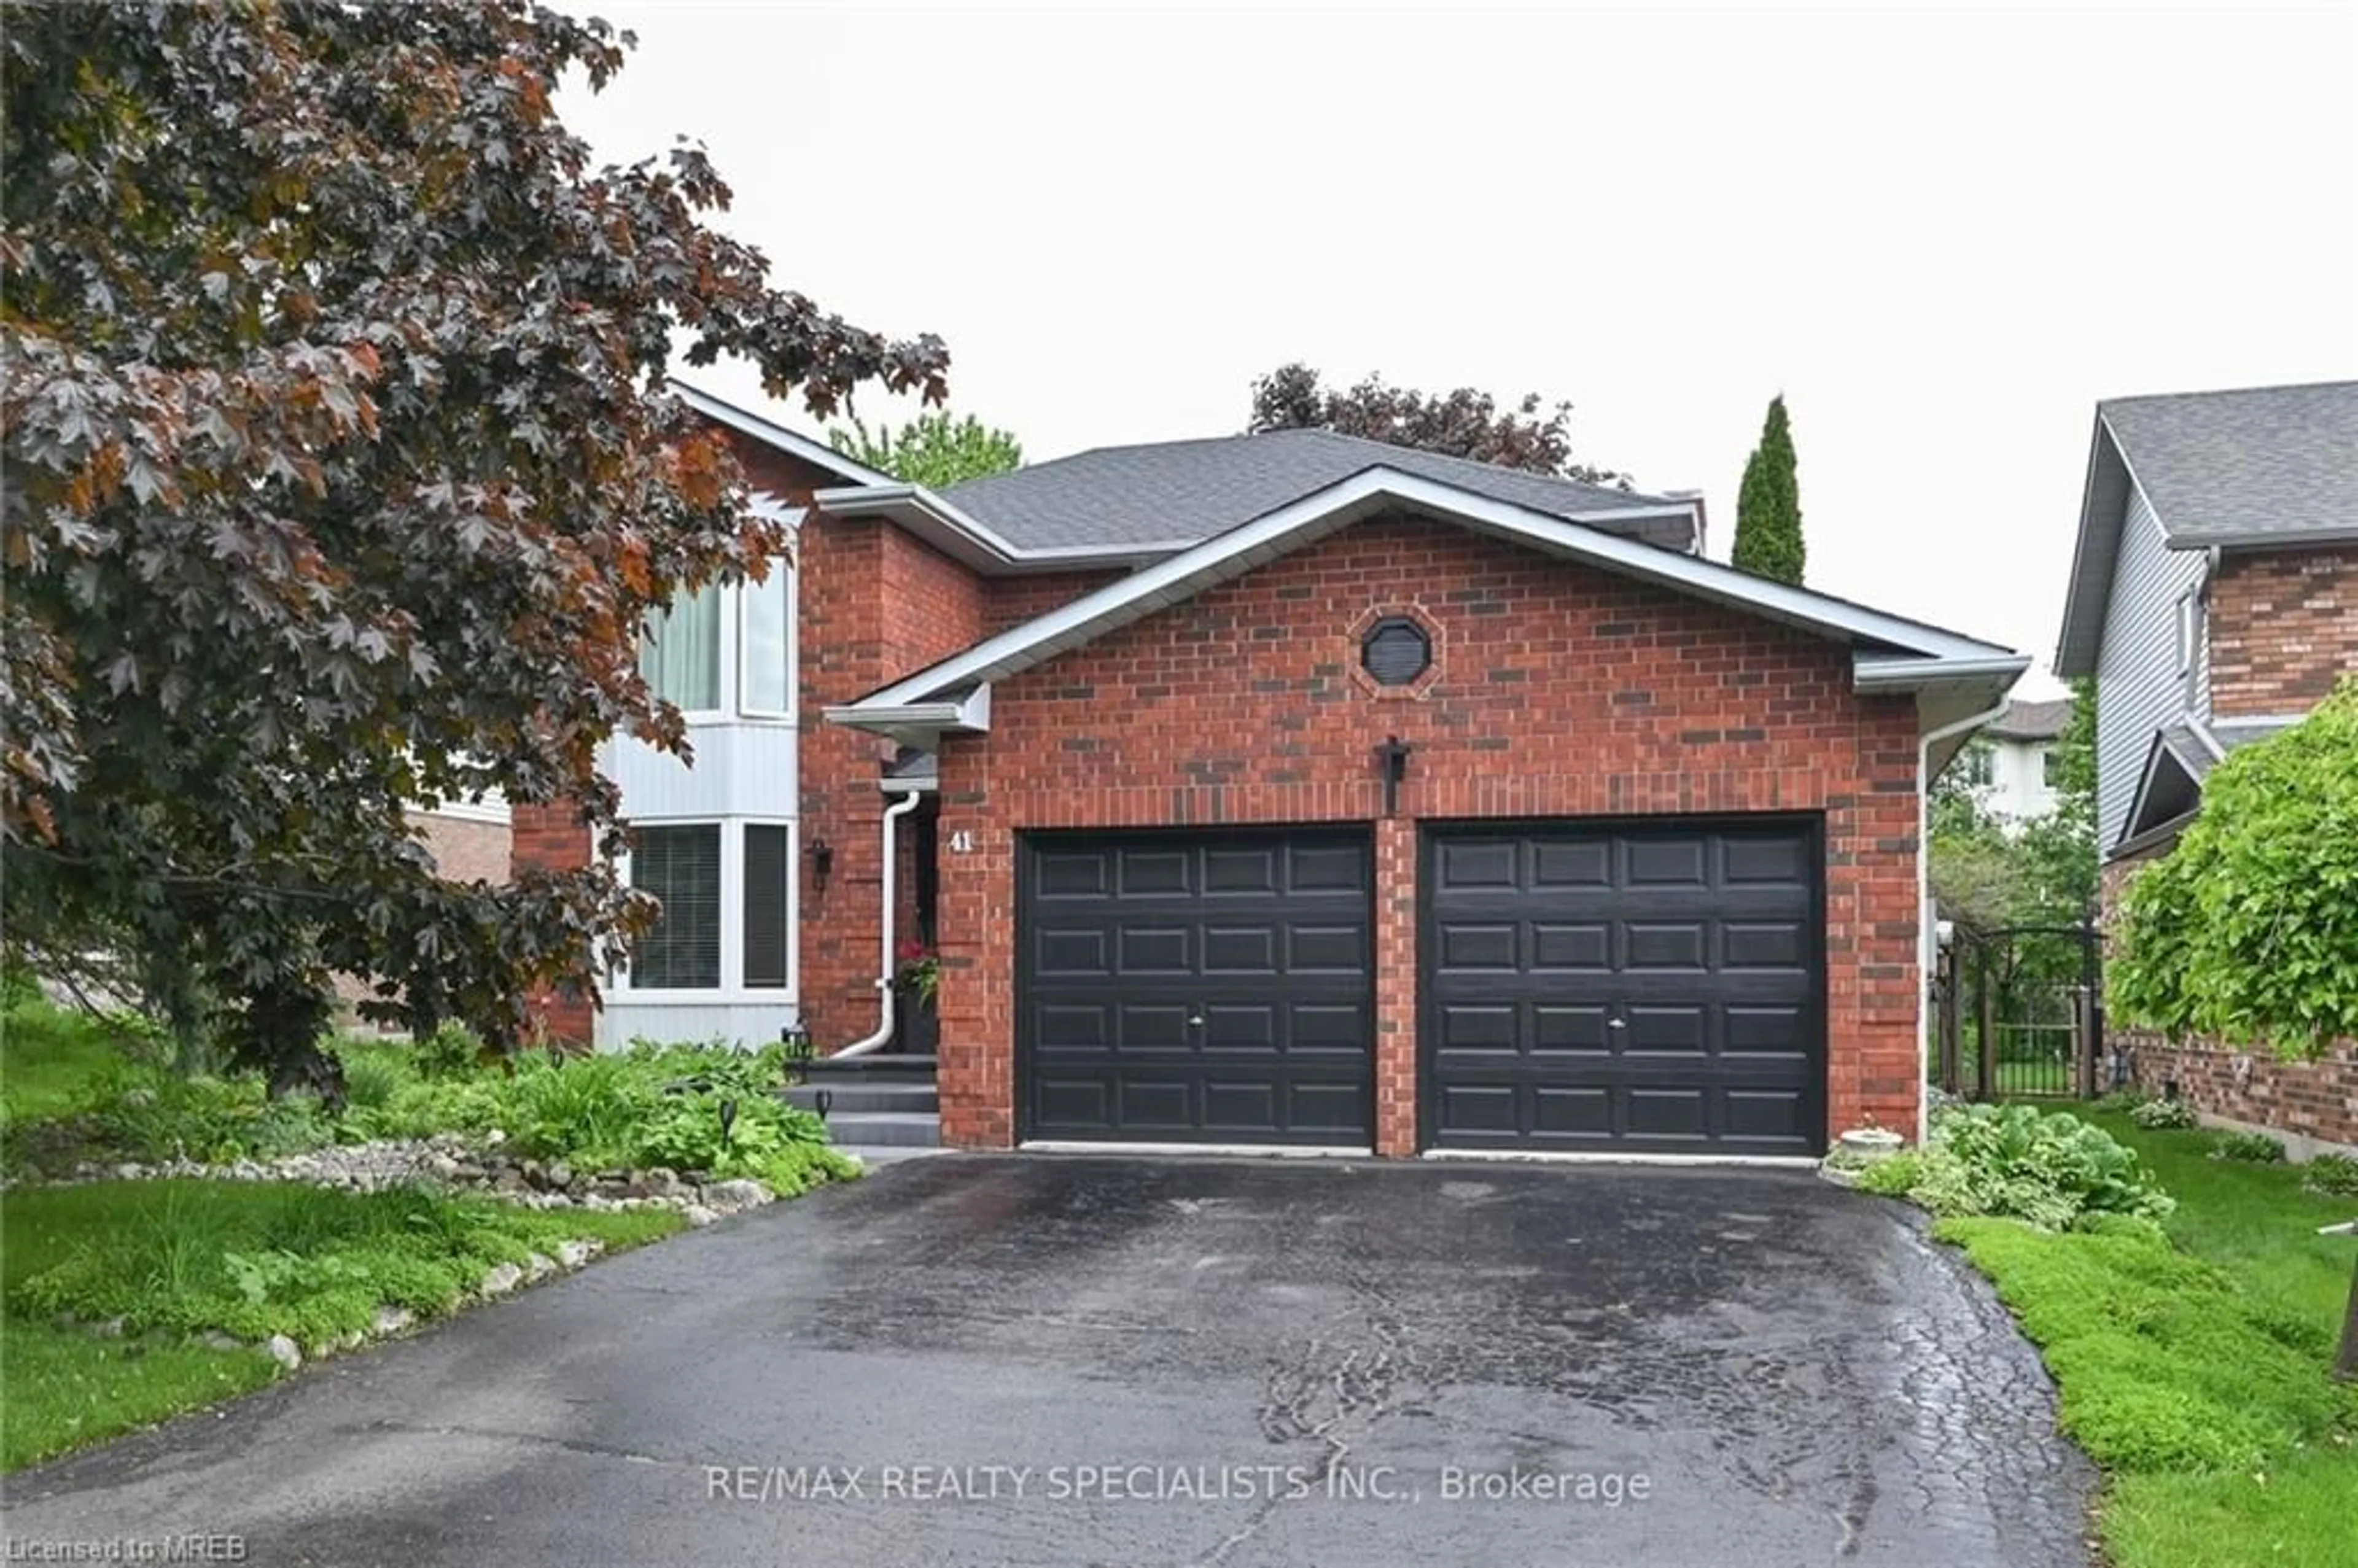 Home with brick exterior material for 41 Passmore Ave, Orangeville Ontario L9W 4K4